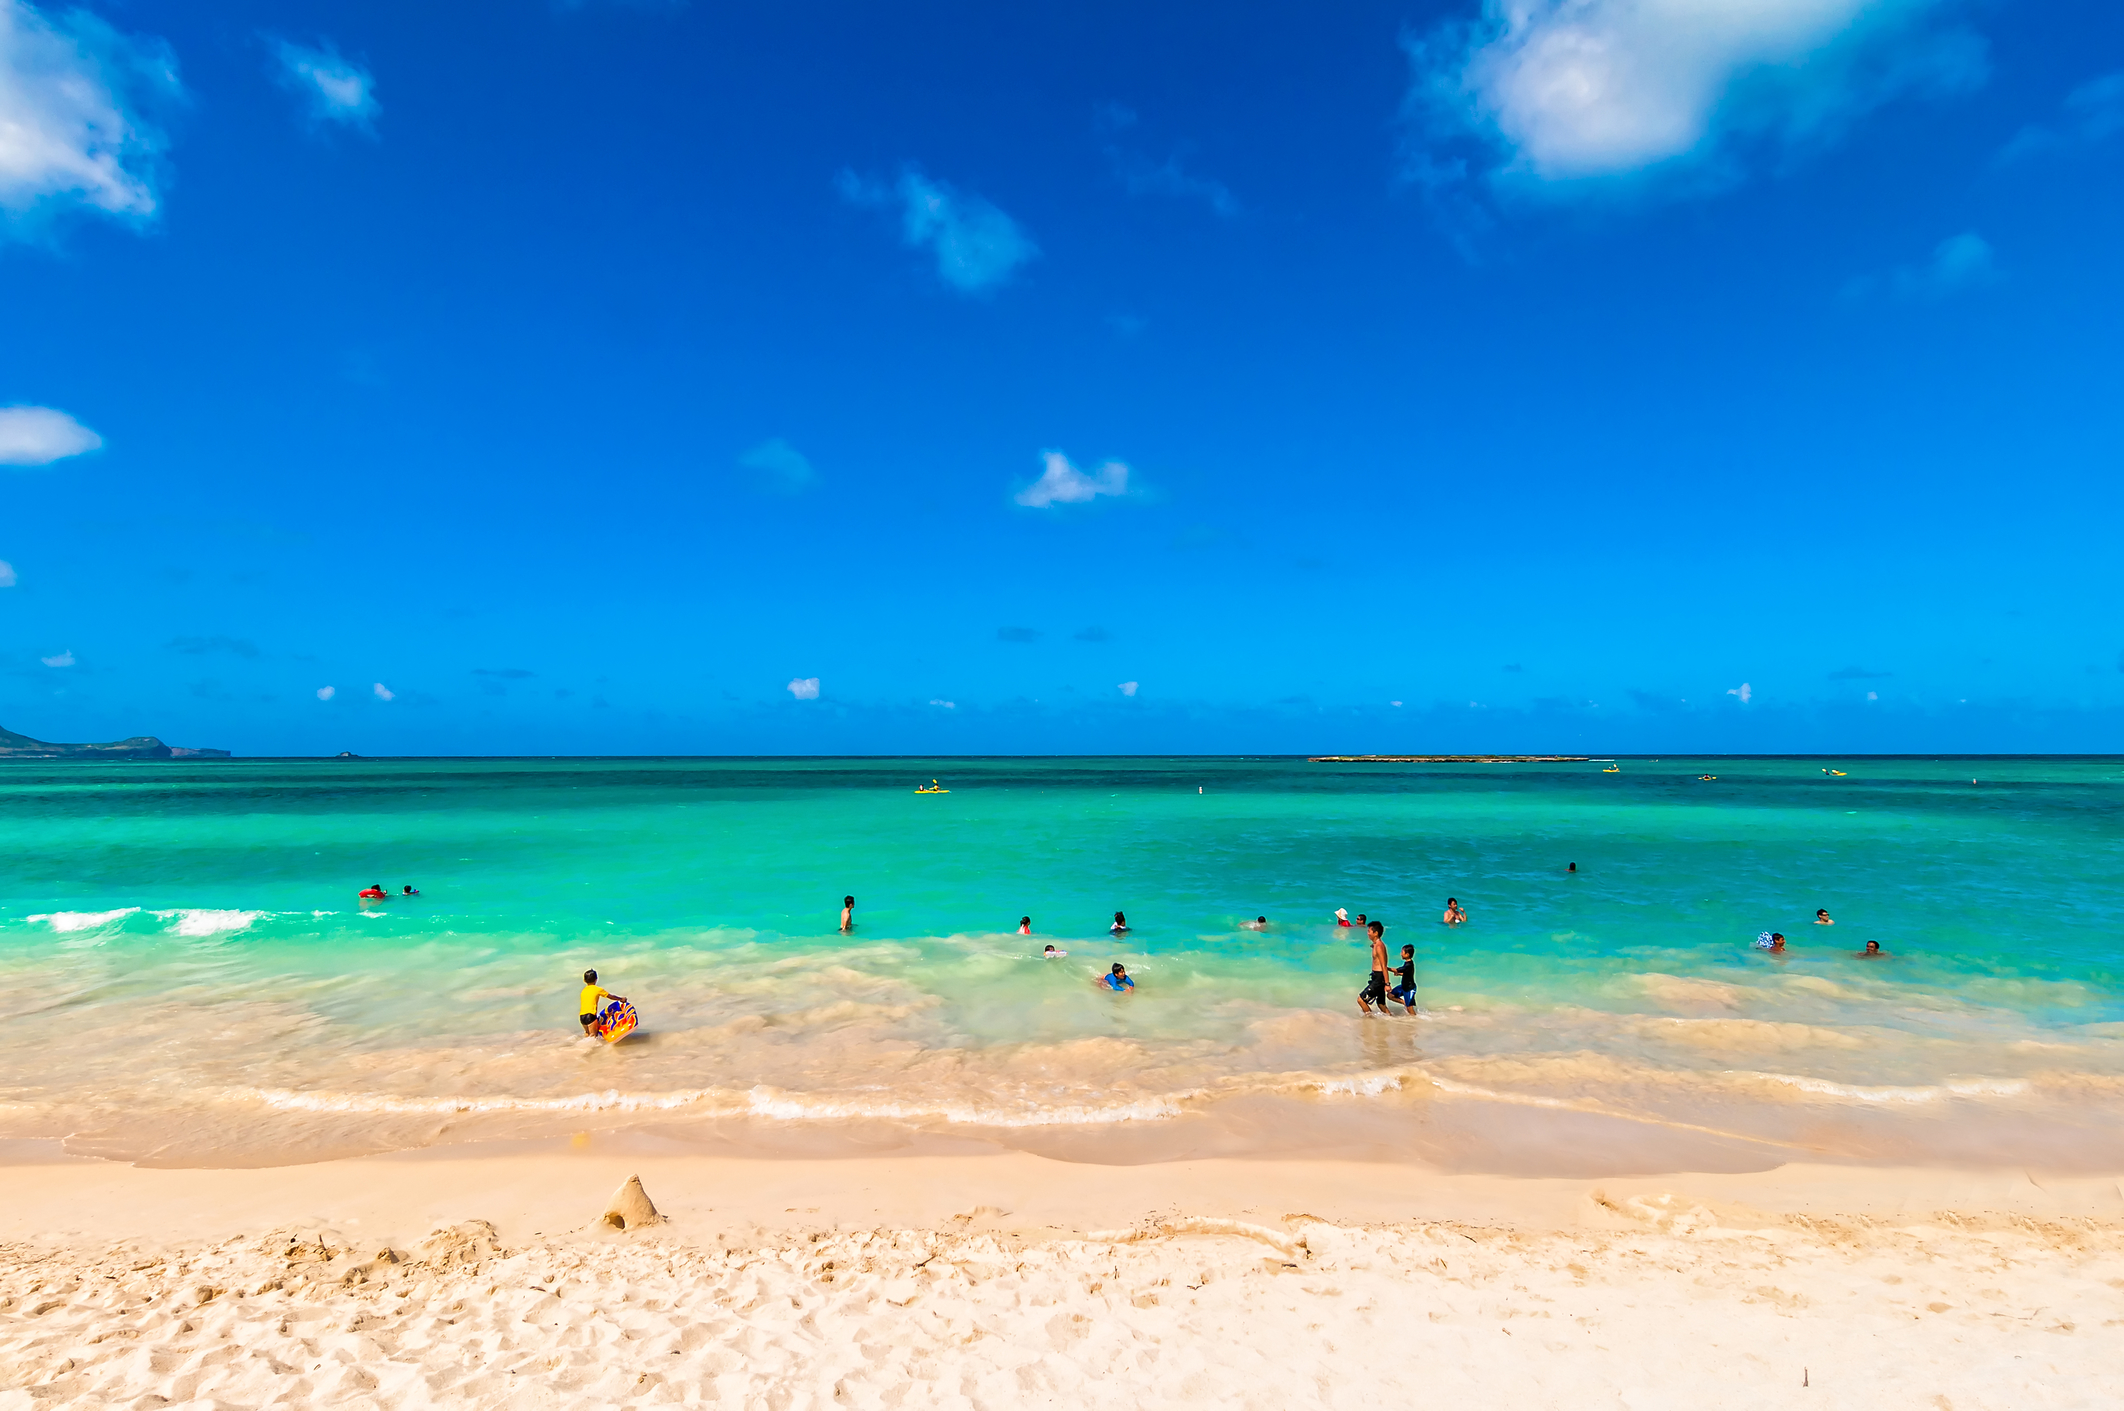 Flights to Hawaii in the $300s to $500s round-trip!